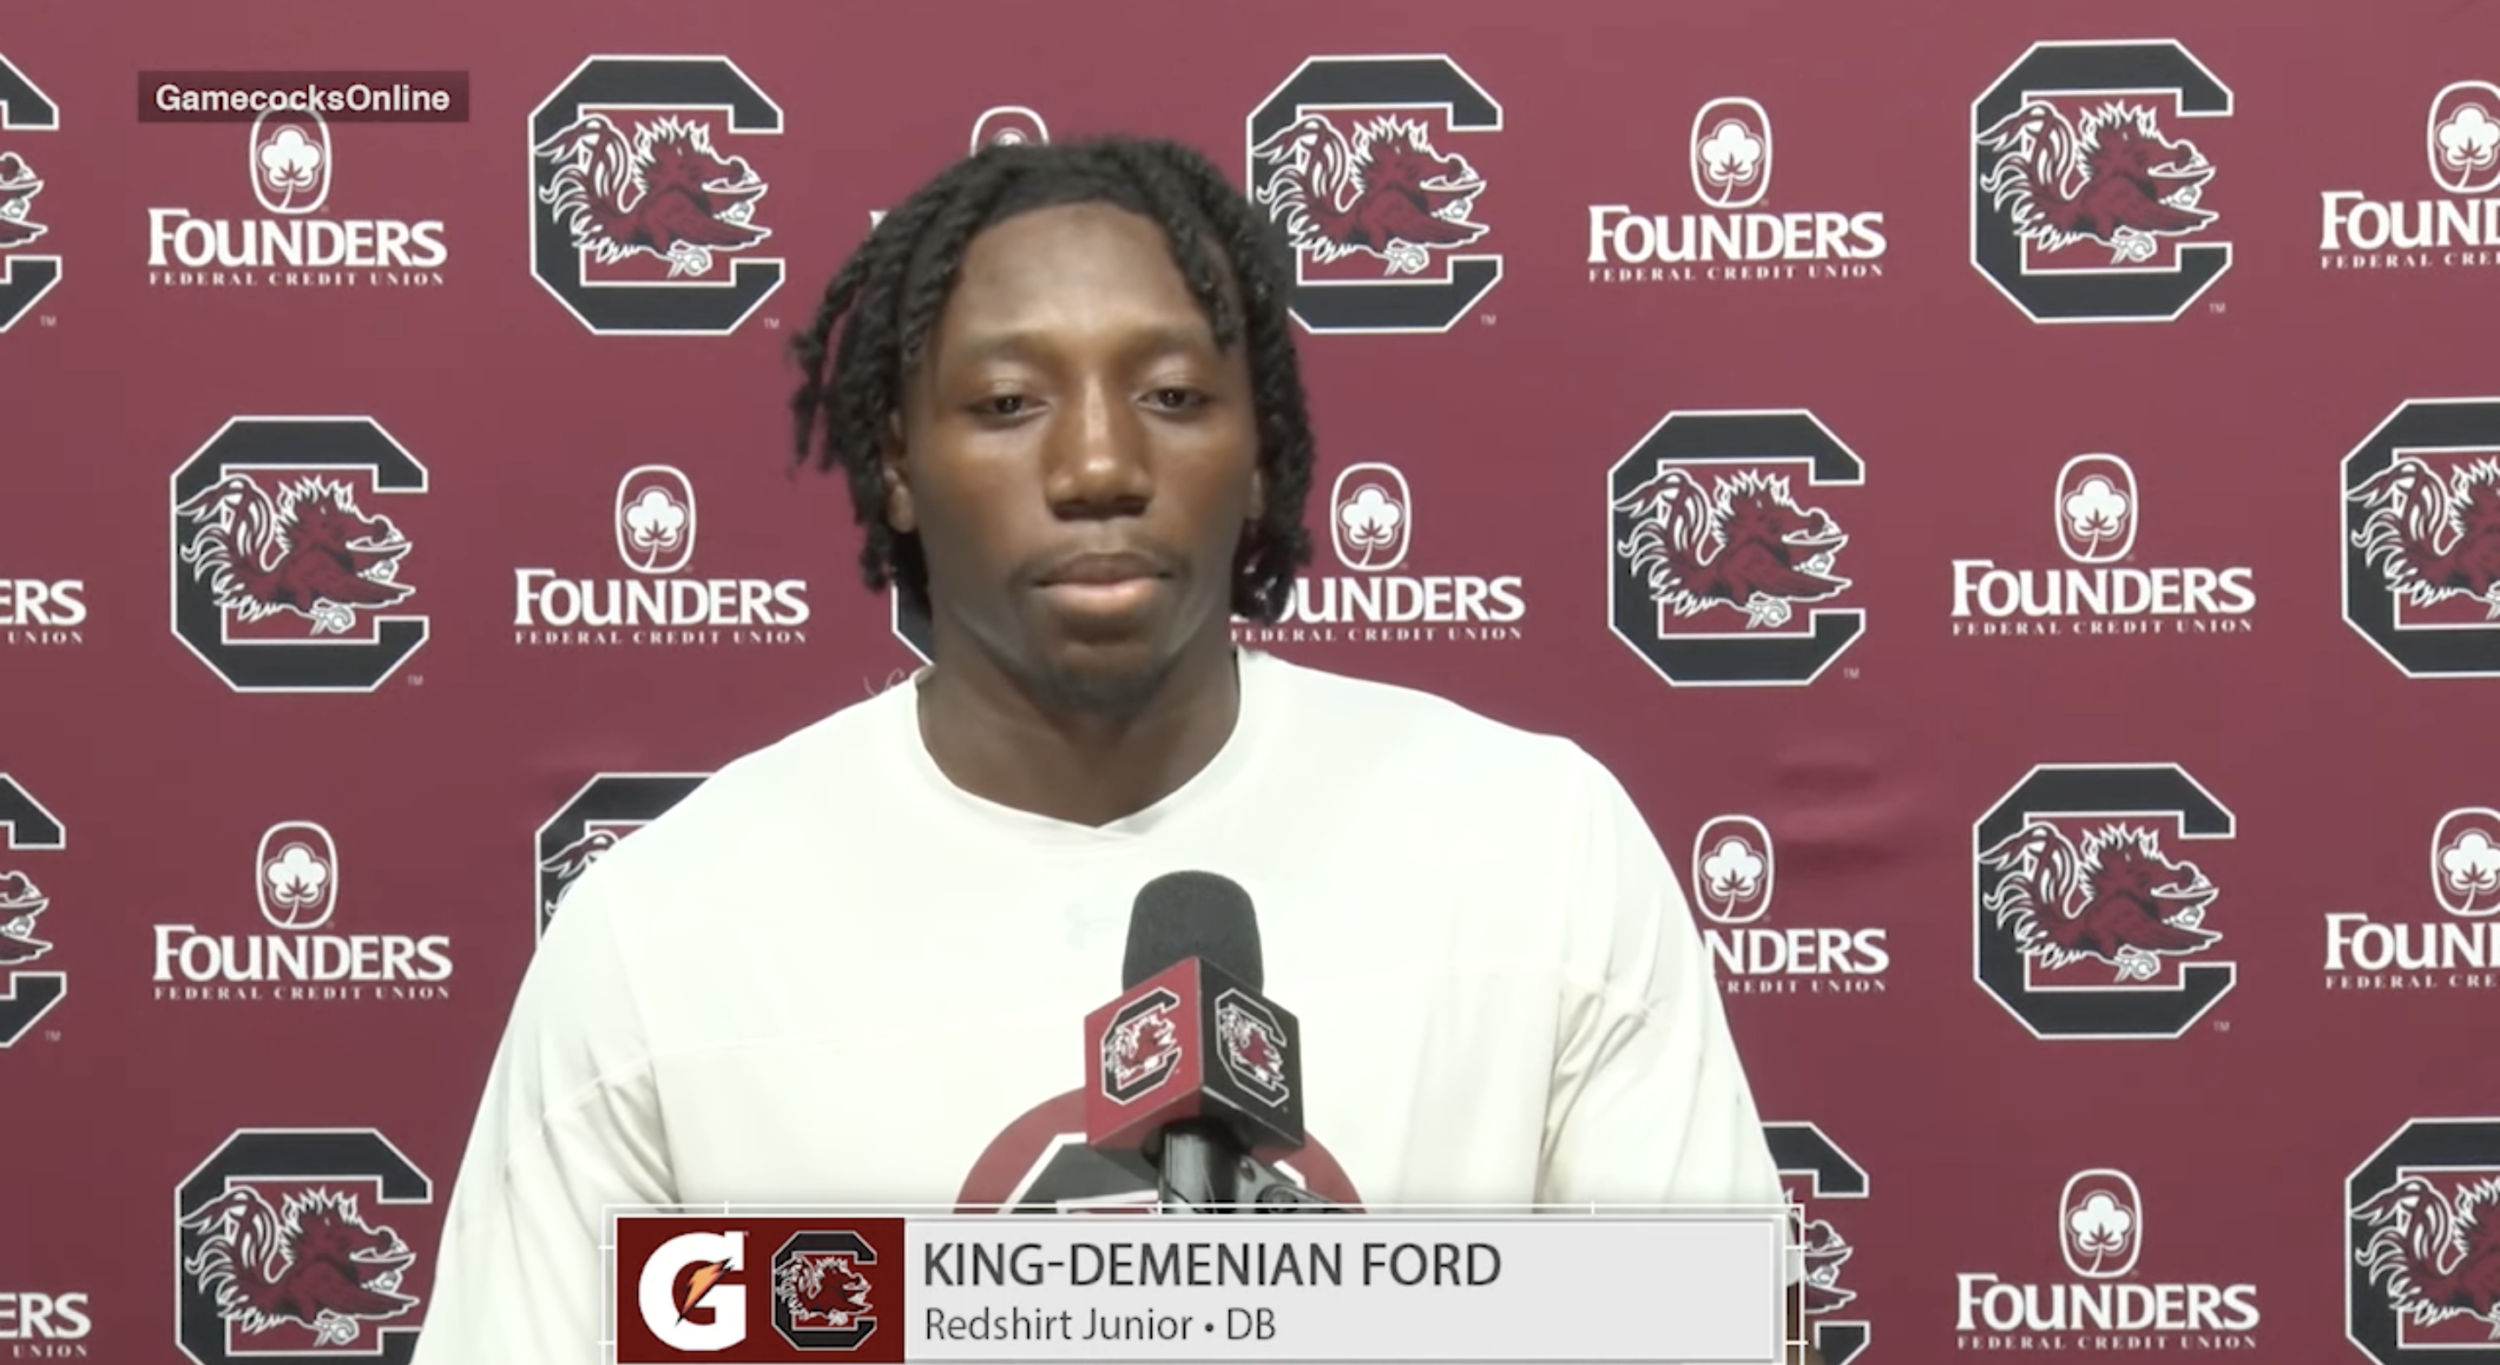 Football: King-Demenian Ford News Conference